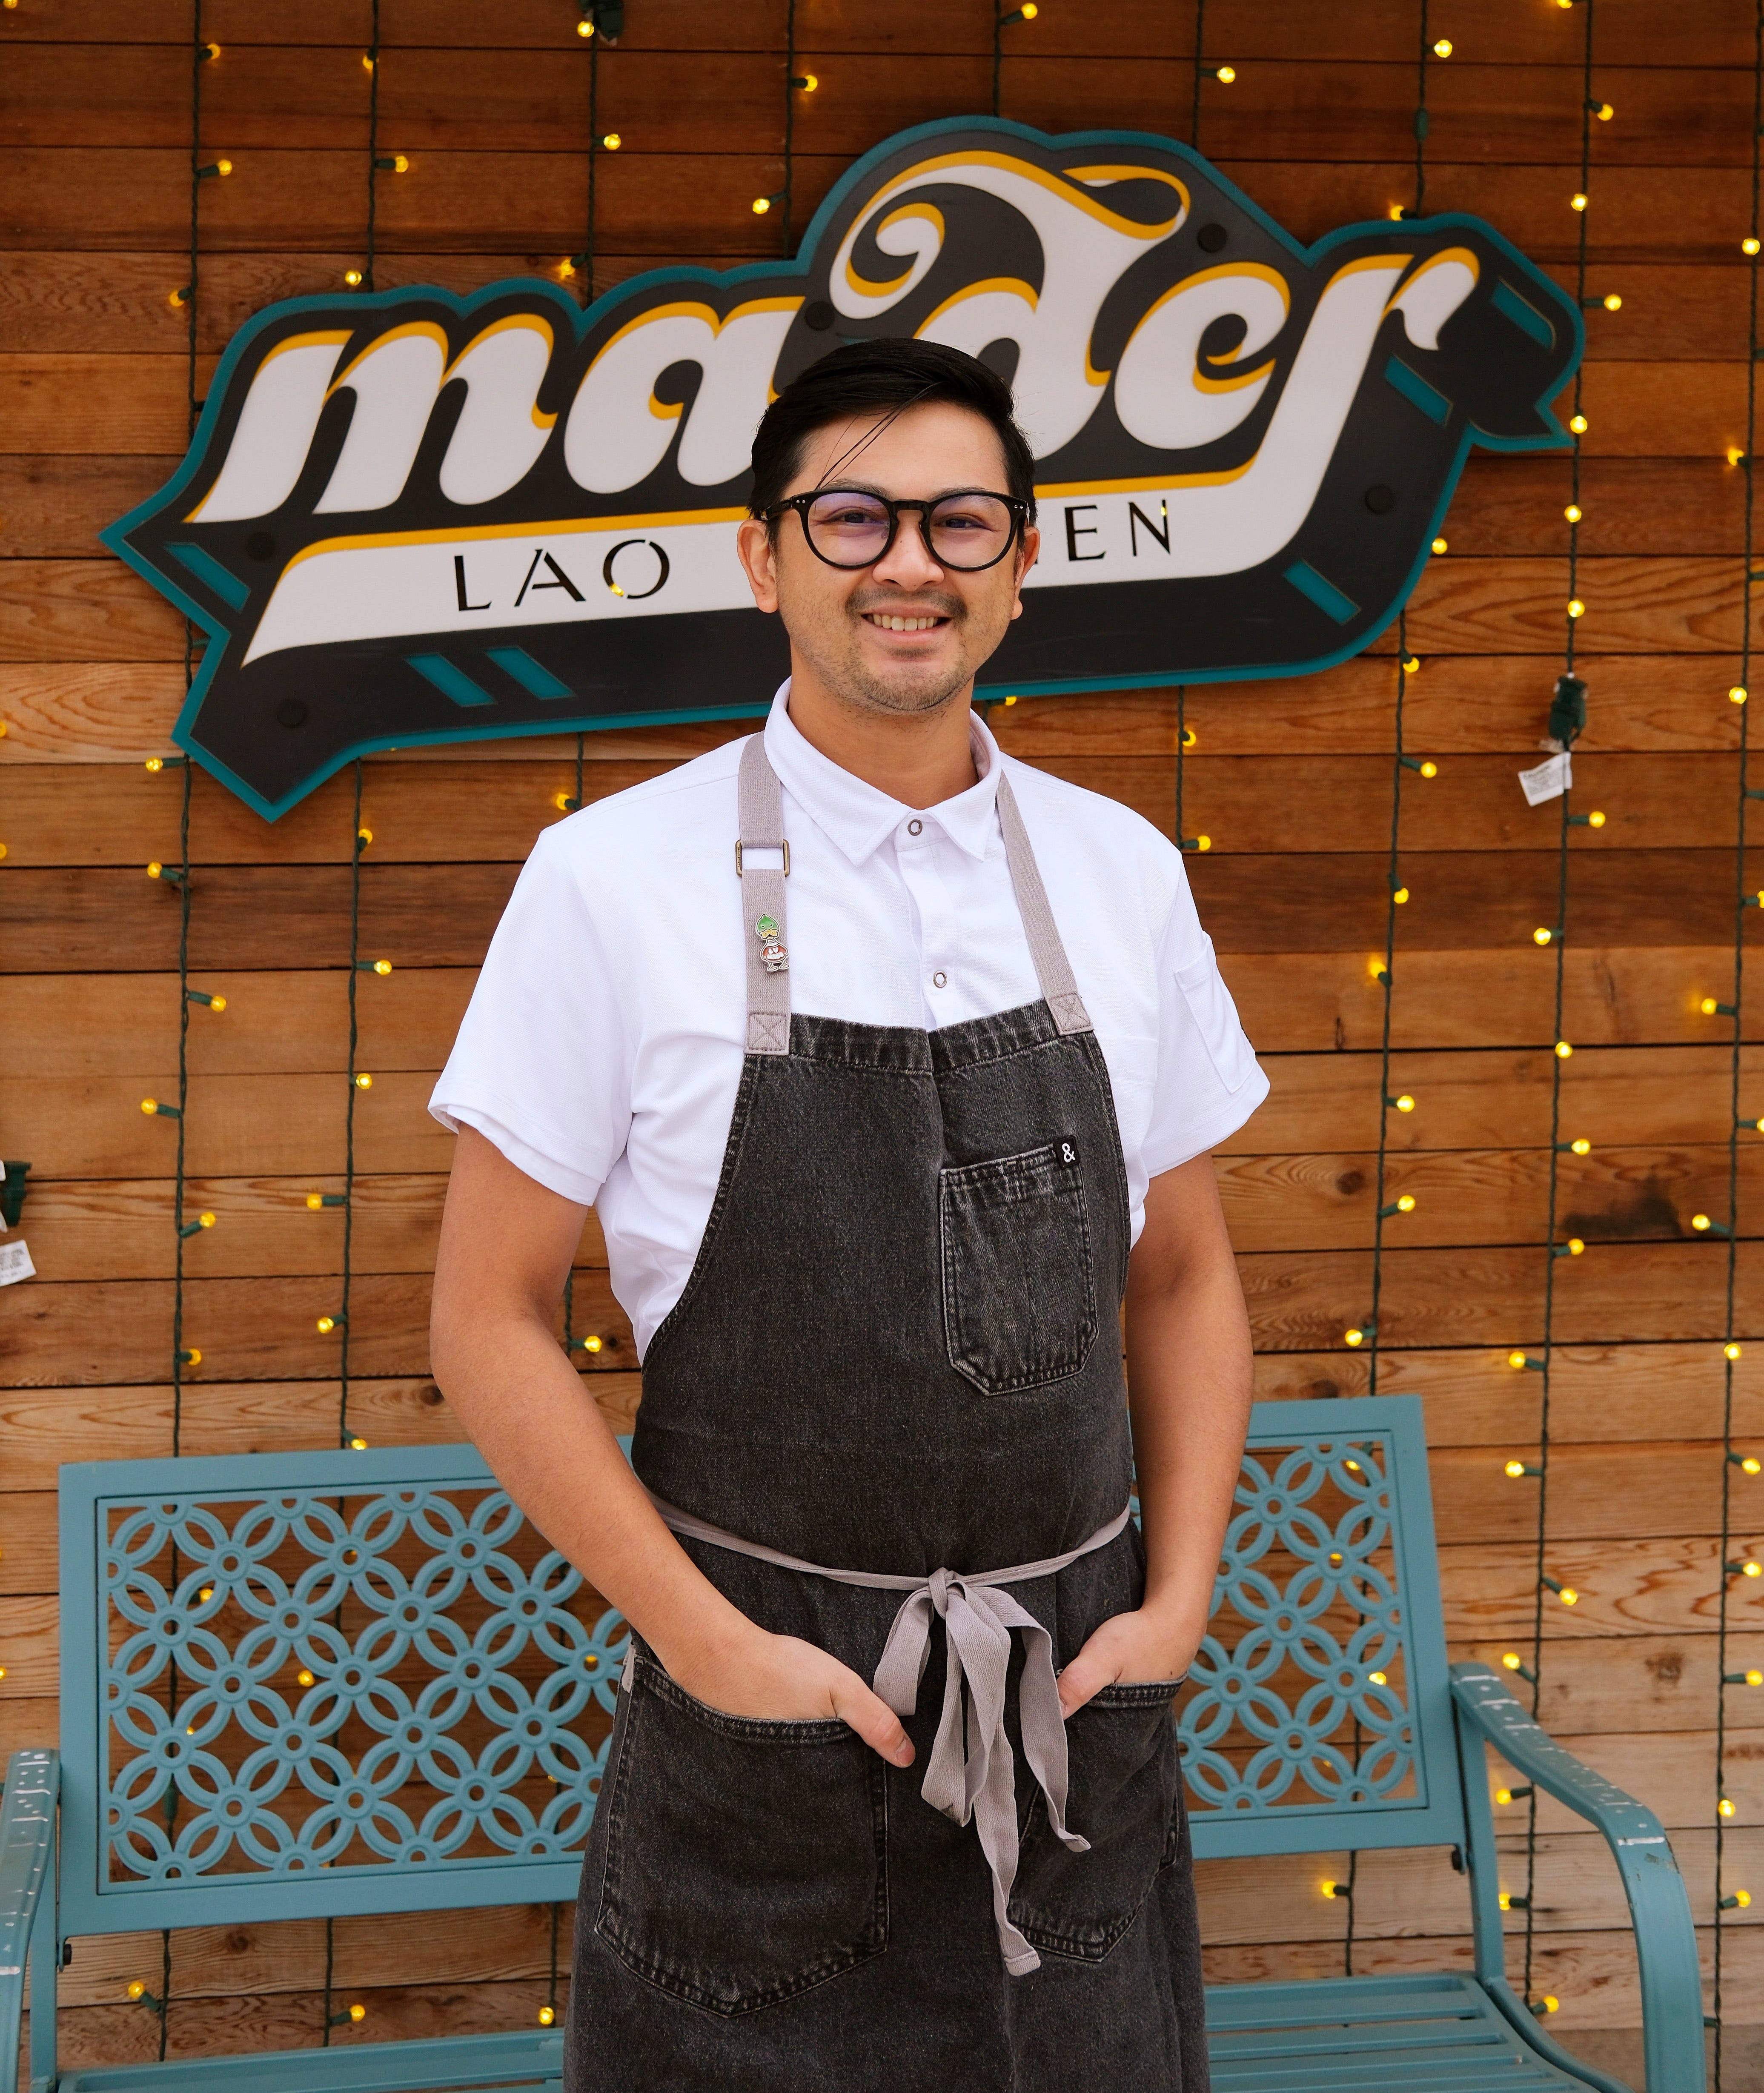 Ma Der magic: Why chef Jeff Chanchaleune's latest collab sold out in under 6 hours